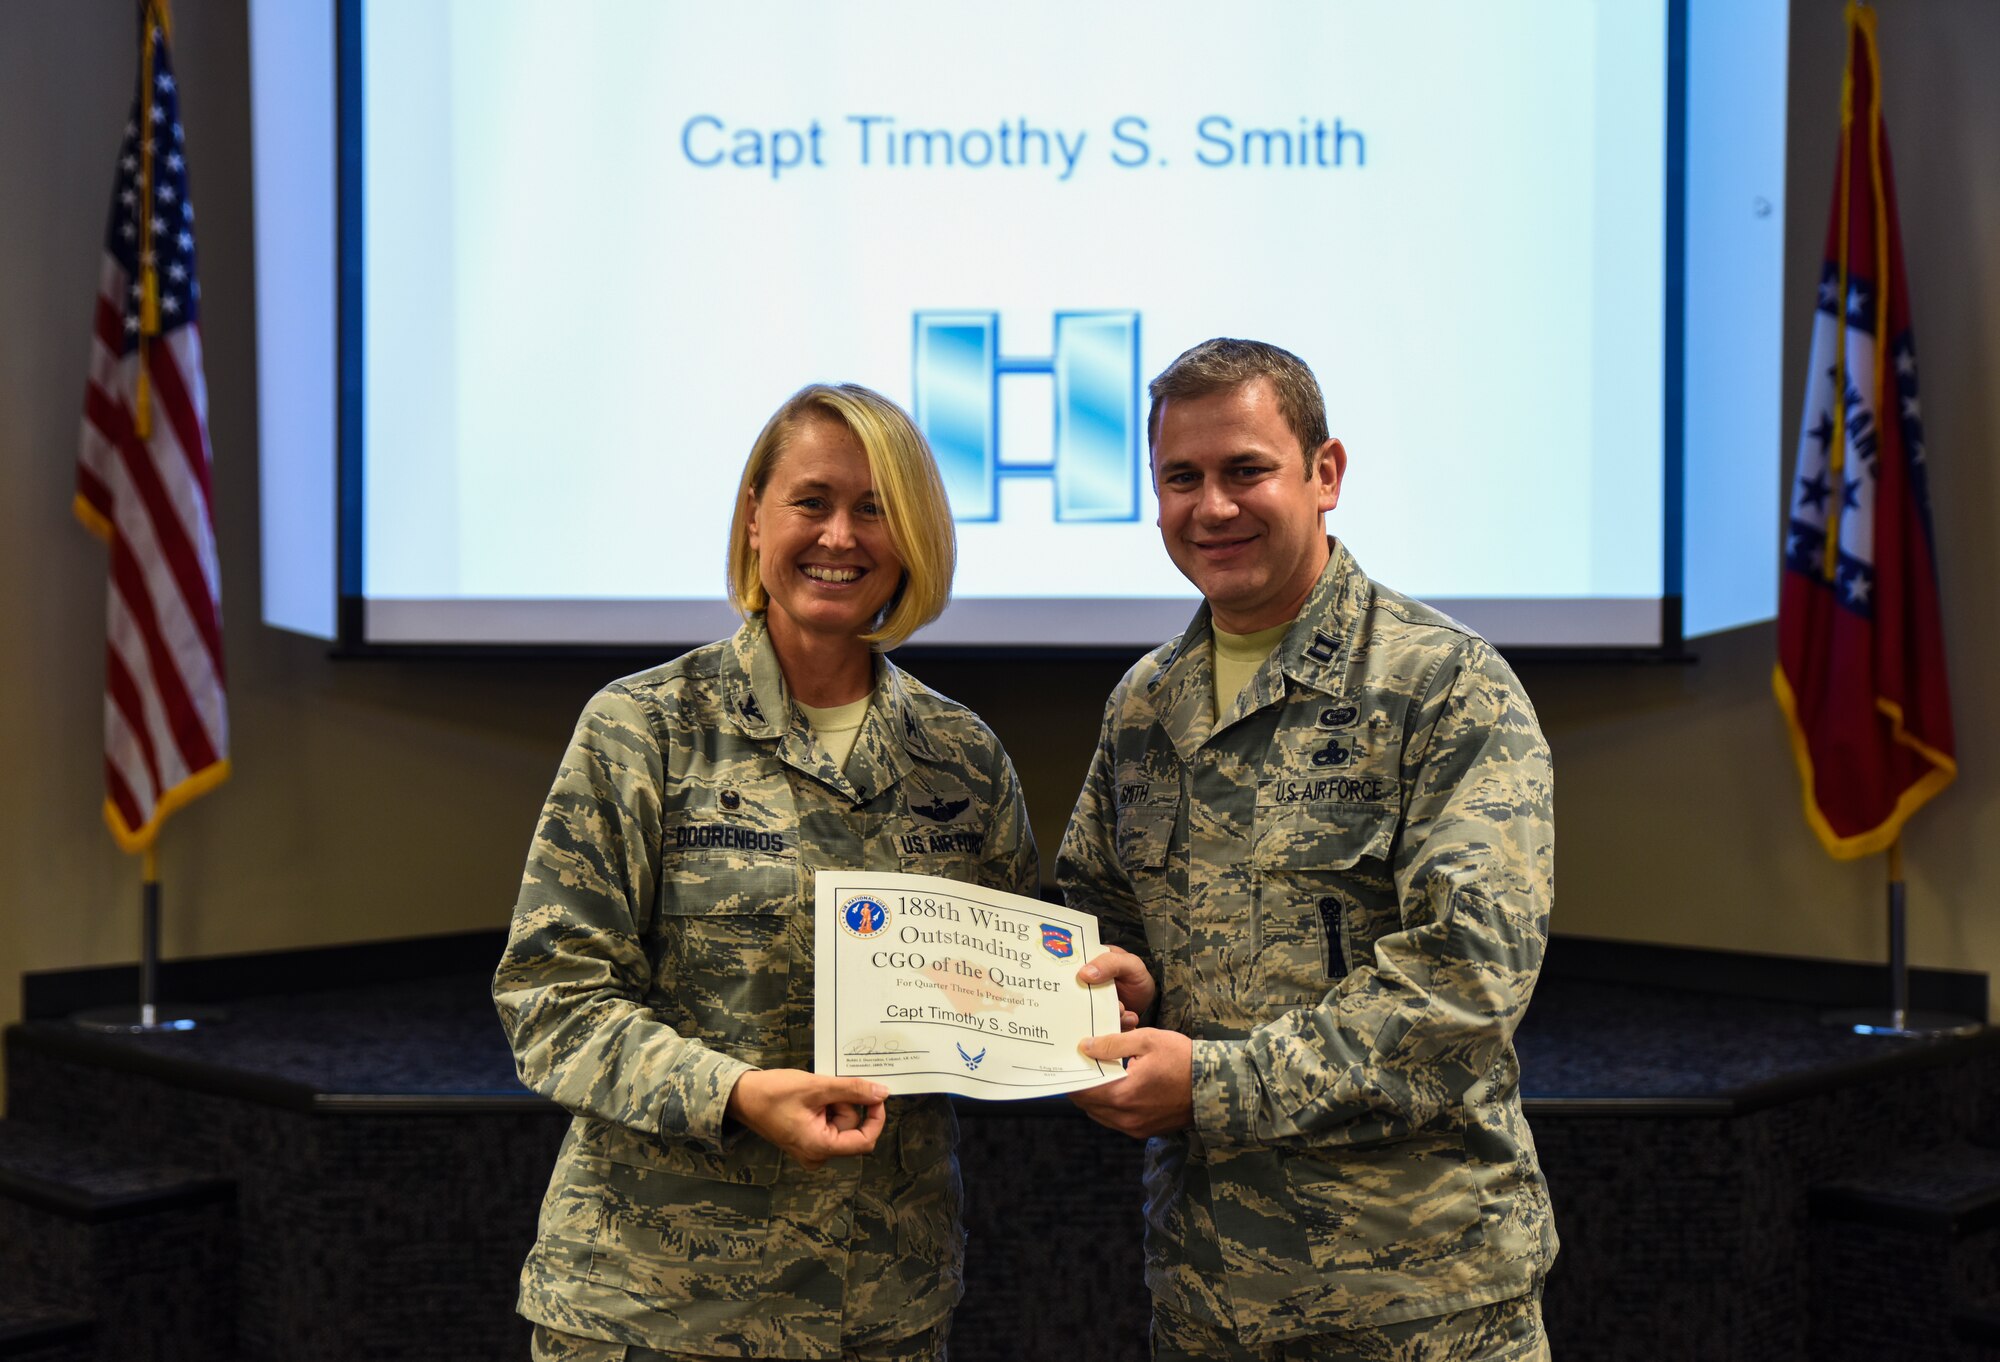 Capt. Timothy Smith, 123rd Intelligence Squadron, is named the 188th Outstanding Company Grade Officer of the Quarter Aug. 6, 2016, for fiscal year 2016 quarter three at Ebbing Air National Guard Base, Fort Smith, Ark. The Outstanding Airman of the Quarter program promotes professional development, innovation and mission success by recognizing those who excel in their carrier fields while fostering the cultivation of ready, responsive and highly-skilled Airman. The award was presented to Overstreet by Col. Bobbi Doorenbos, 188th Wing commander. (U.S. Air National Guard photo by Senior Airman Cody Martin)